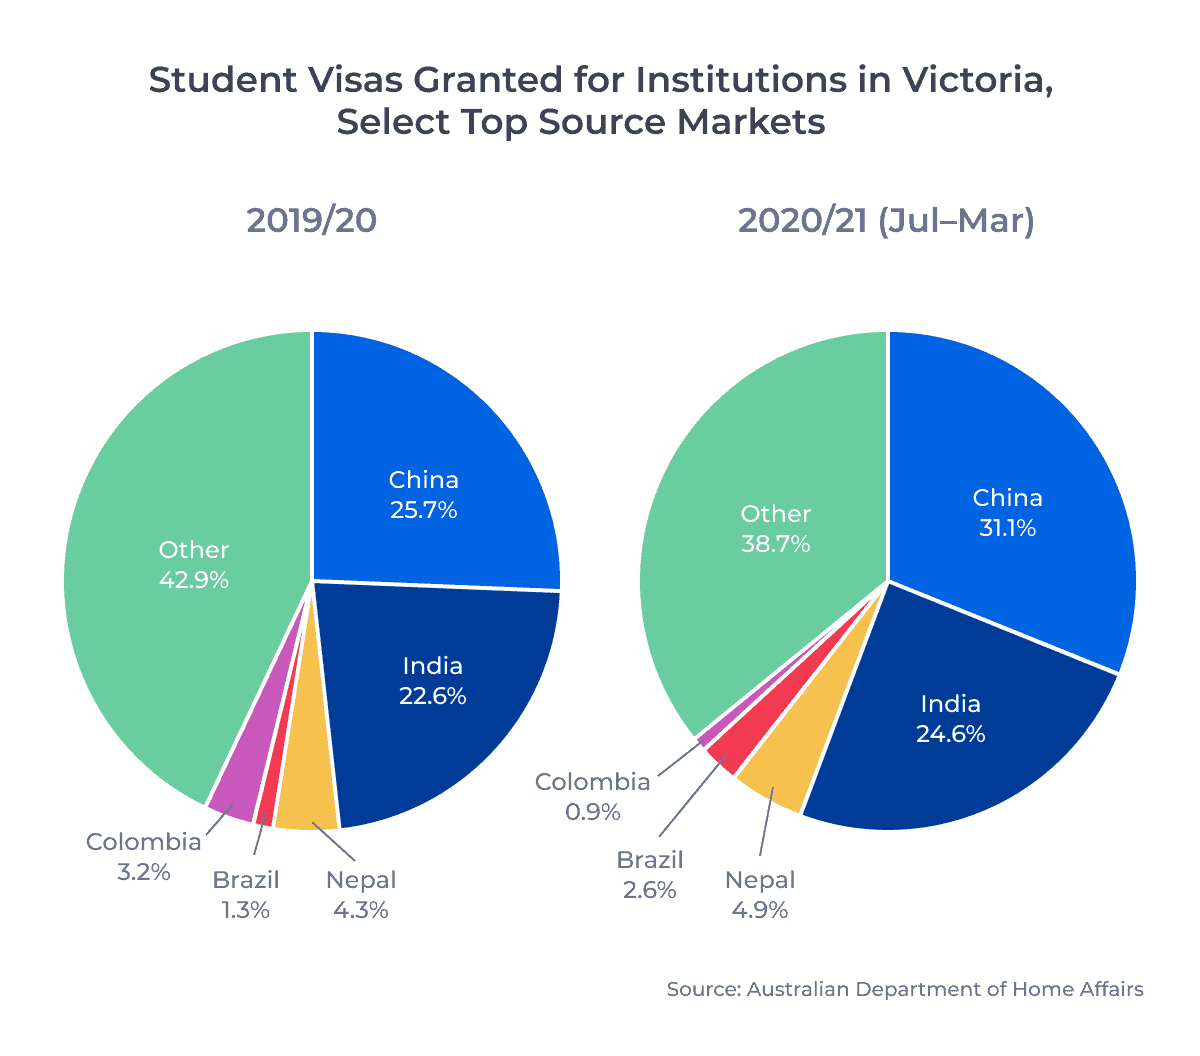 Student Visas Granted for Institutions in Victoria, Select Top Source Markets